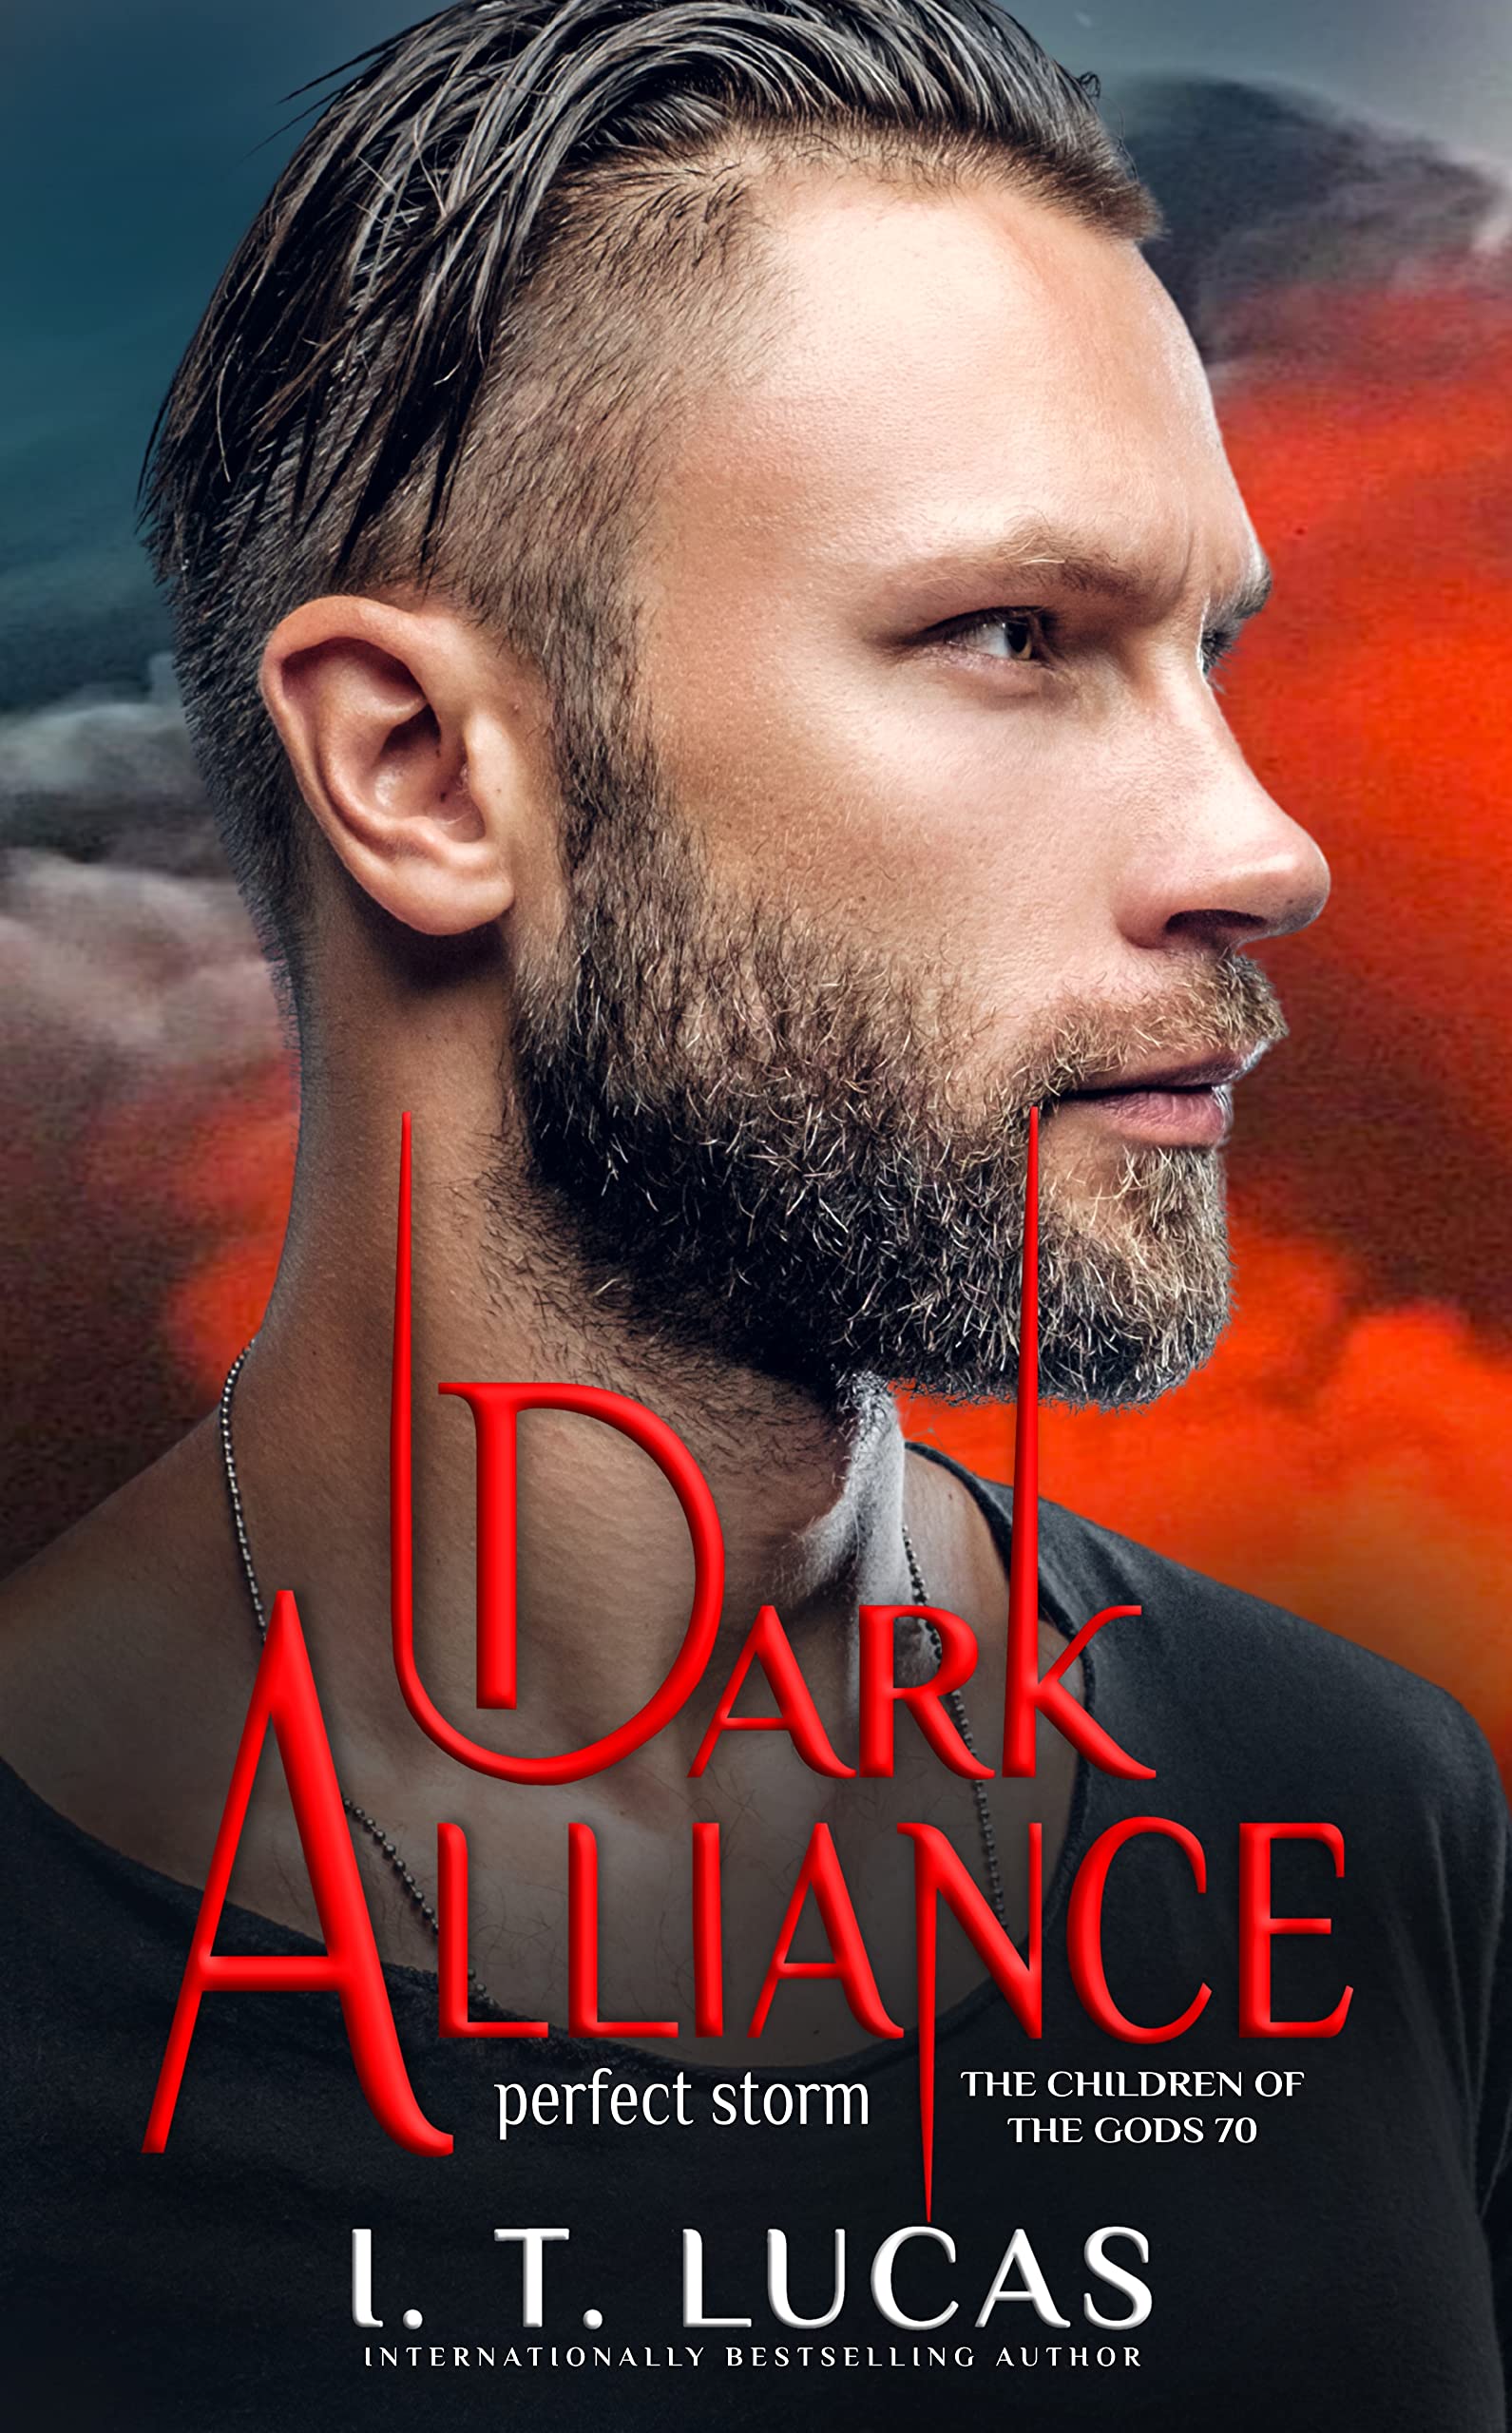 Dark Alliance Perfect Storm by I.T. Lucas PDF Download